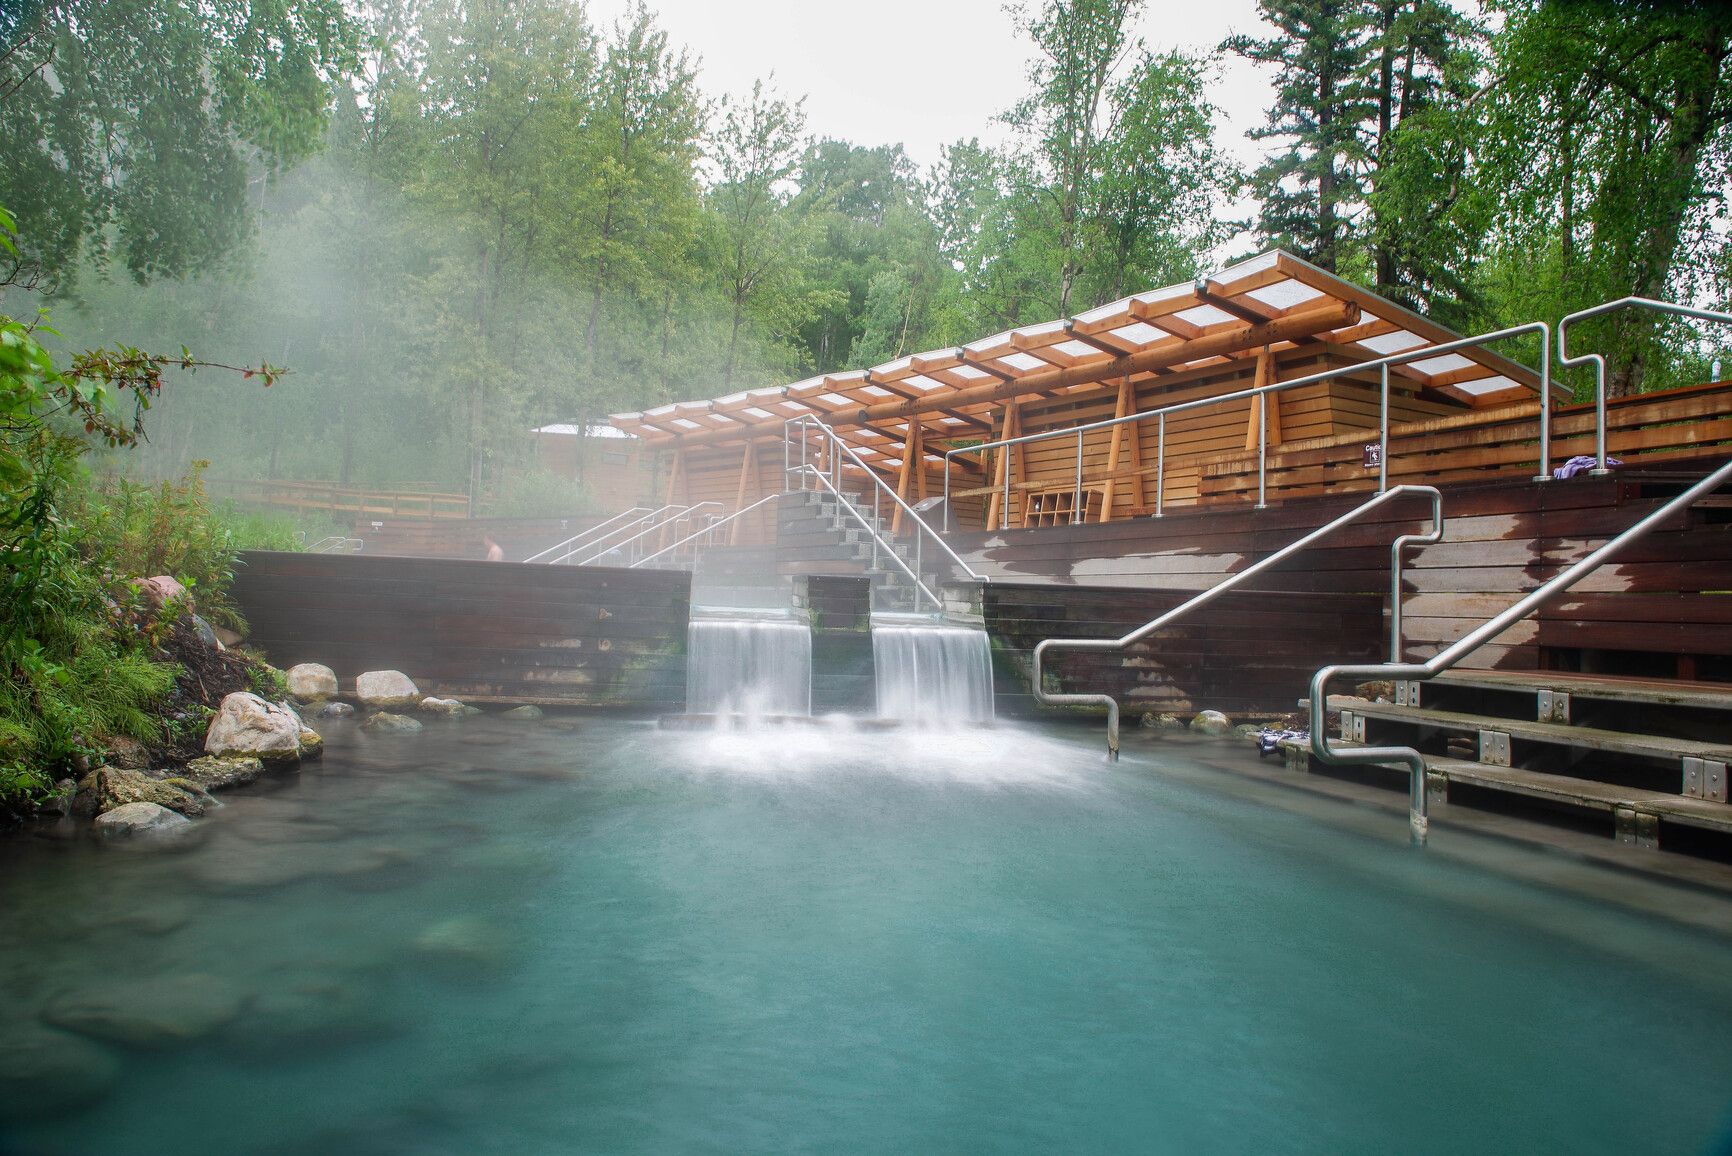 The Alpha pool facility is a great place to relax in the warm water and steam while listening to the sound of water falls. Laird River Hot Springs Park.